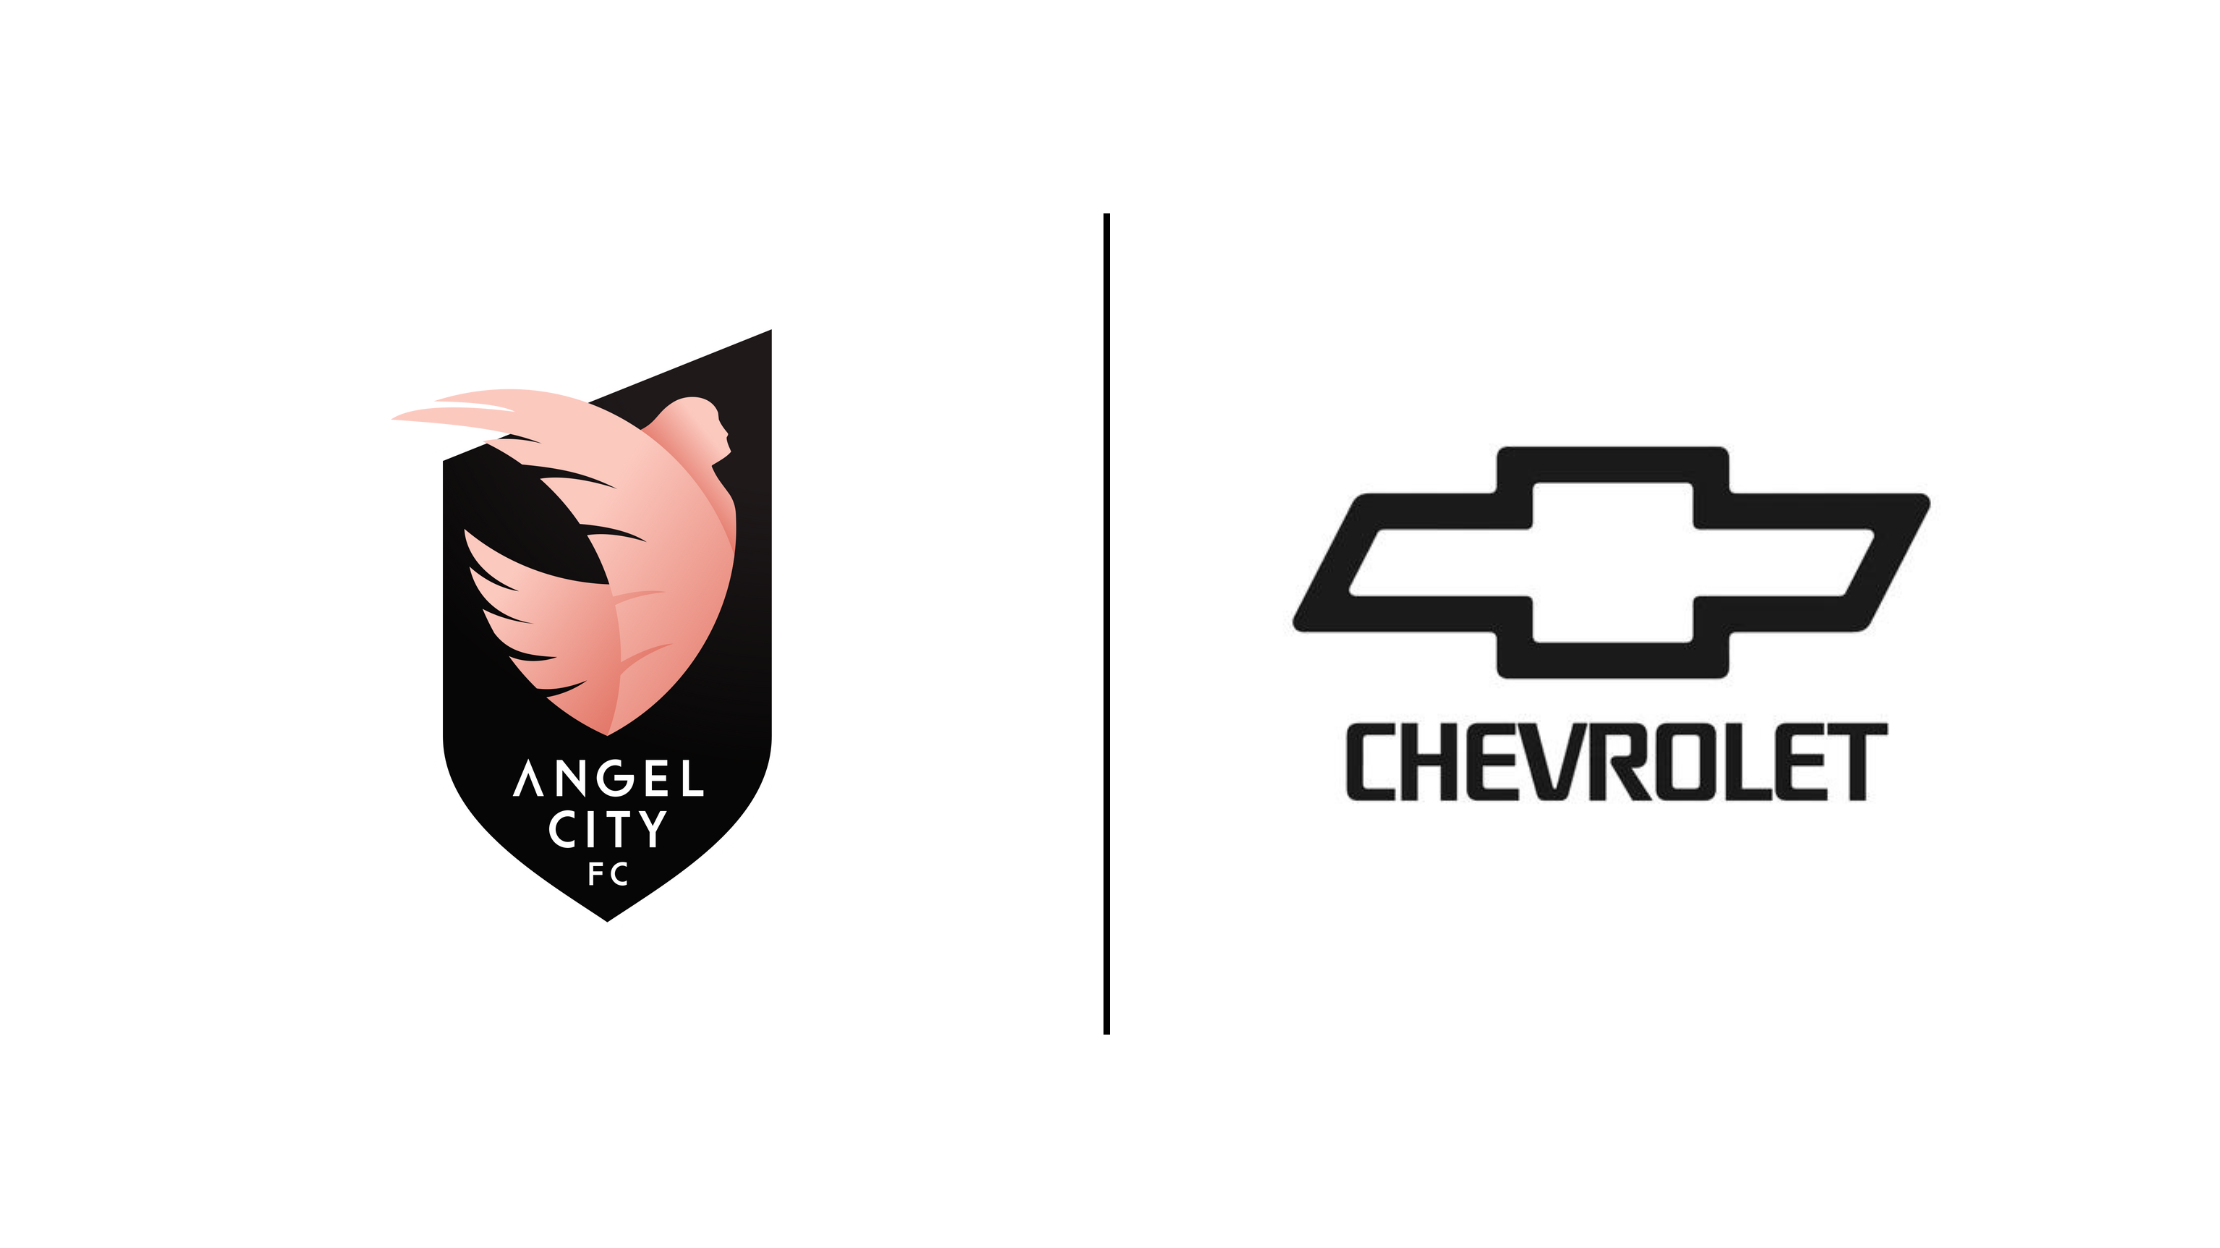 10% Sponsorship Model: Angel City Football Club partners with Chevrolet to give back to the LA community through the Rolling with Chevy Transportation Program